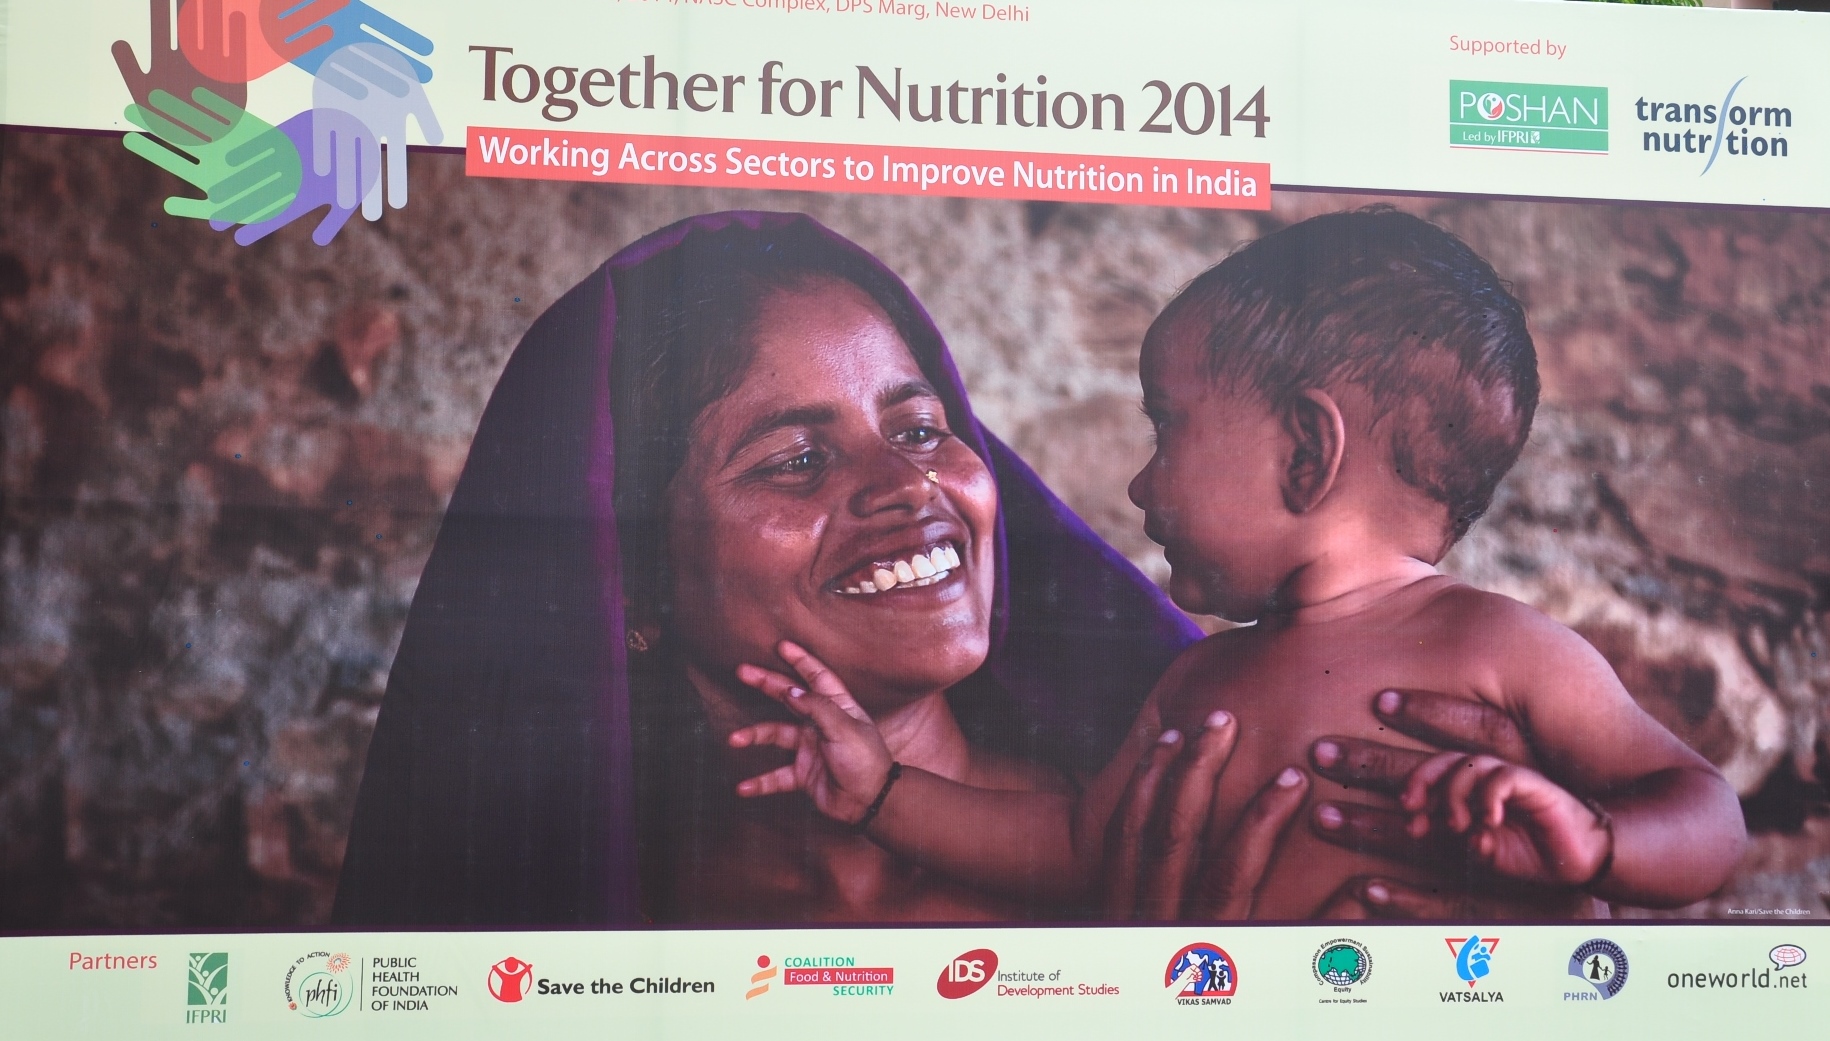 Day 1 Reflections: Together for Nutrition 2014